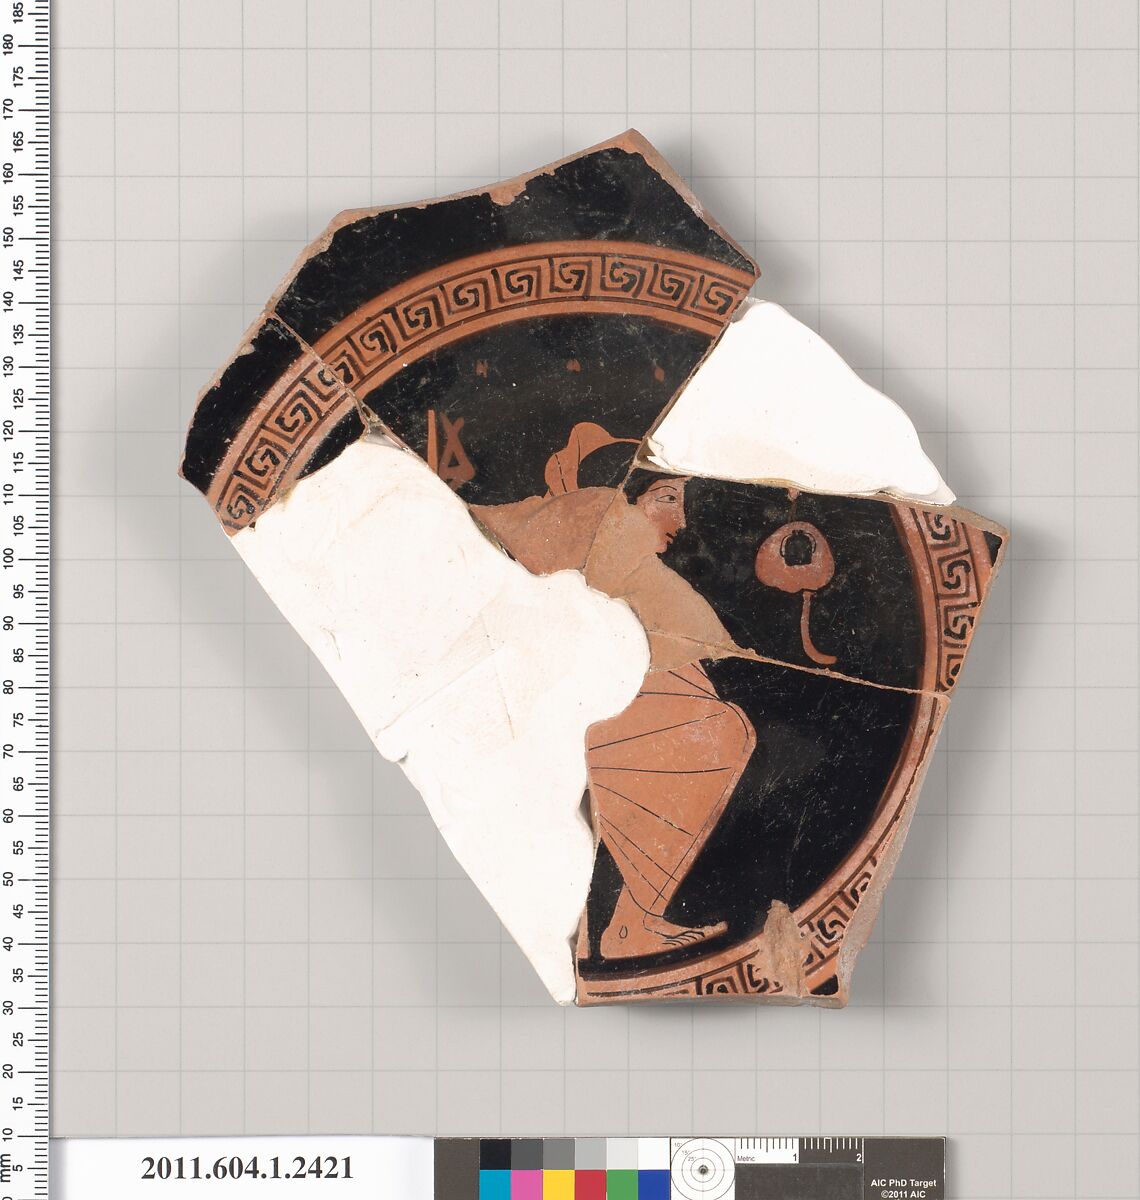 Terracotta fragment of a kylix (drinking cup), Attributed to the Tarquinia Painter [DvB], Terracotta, Greek, Attic 